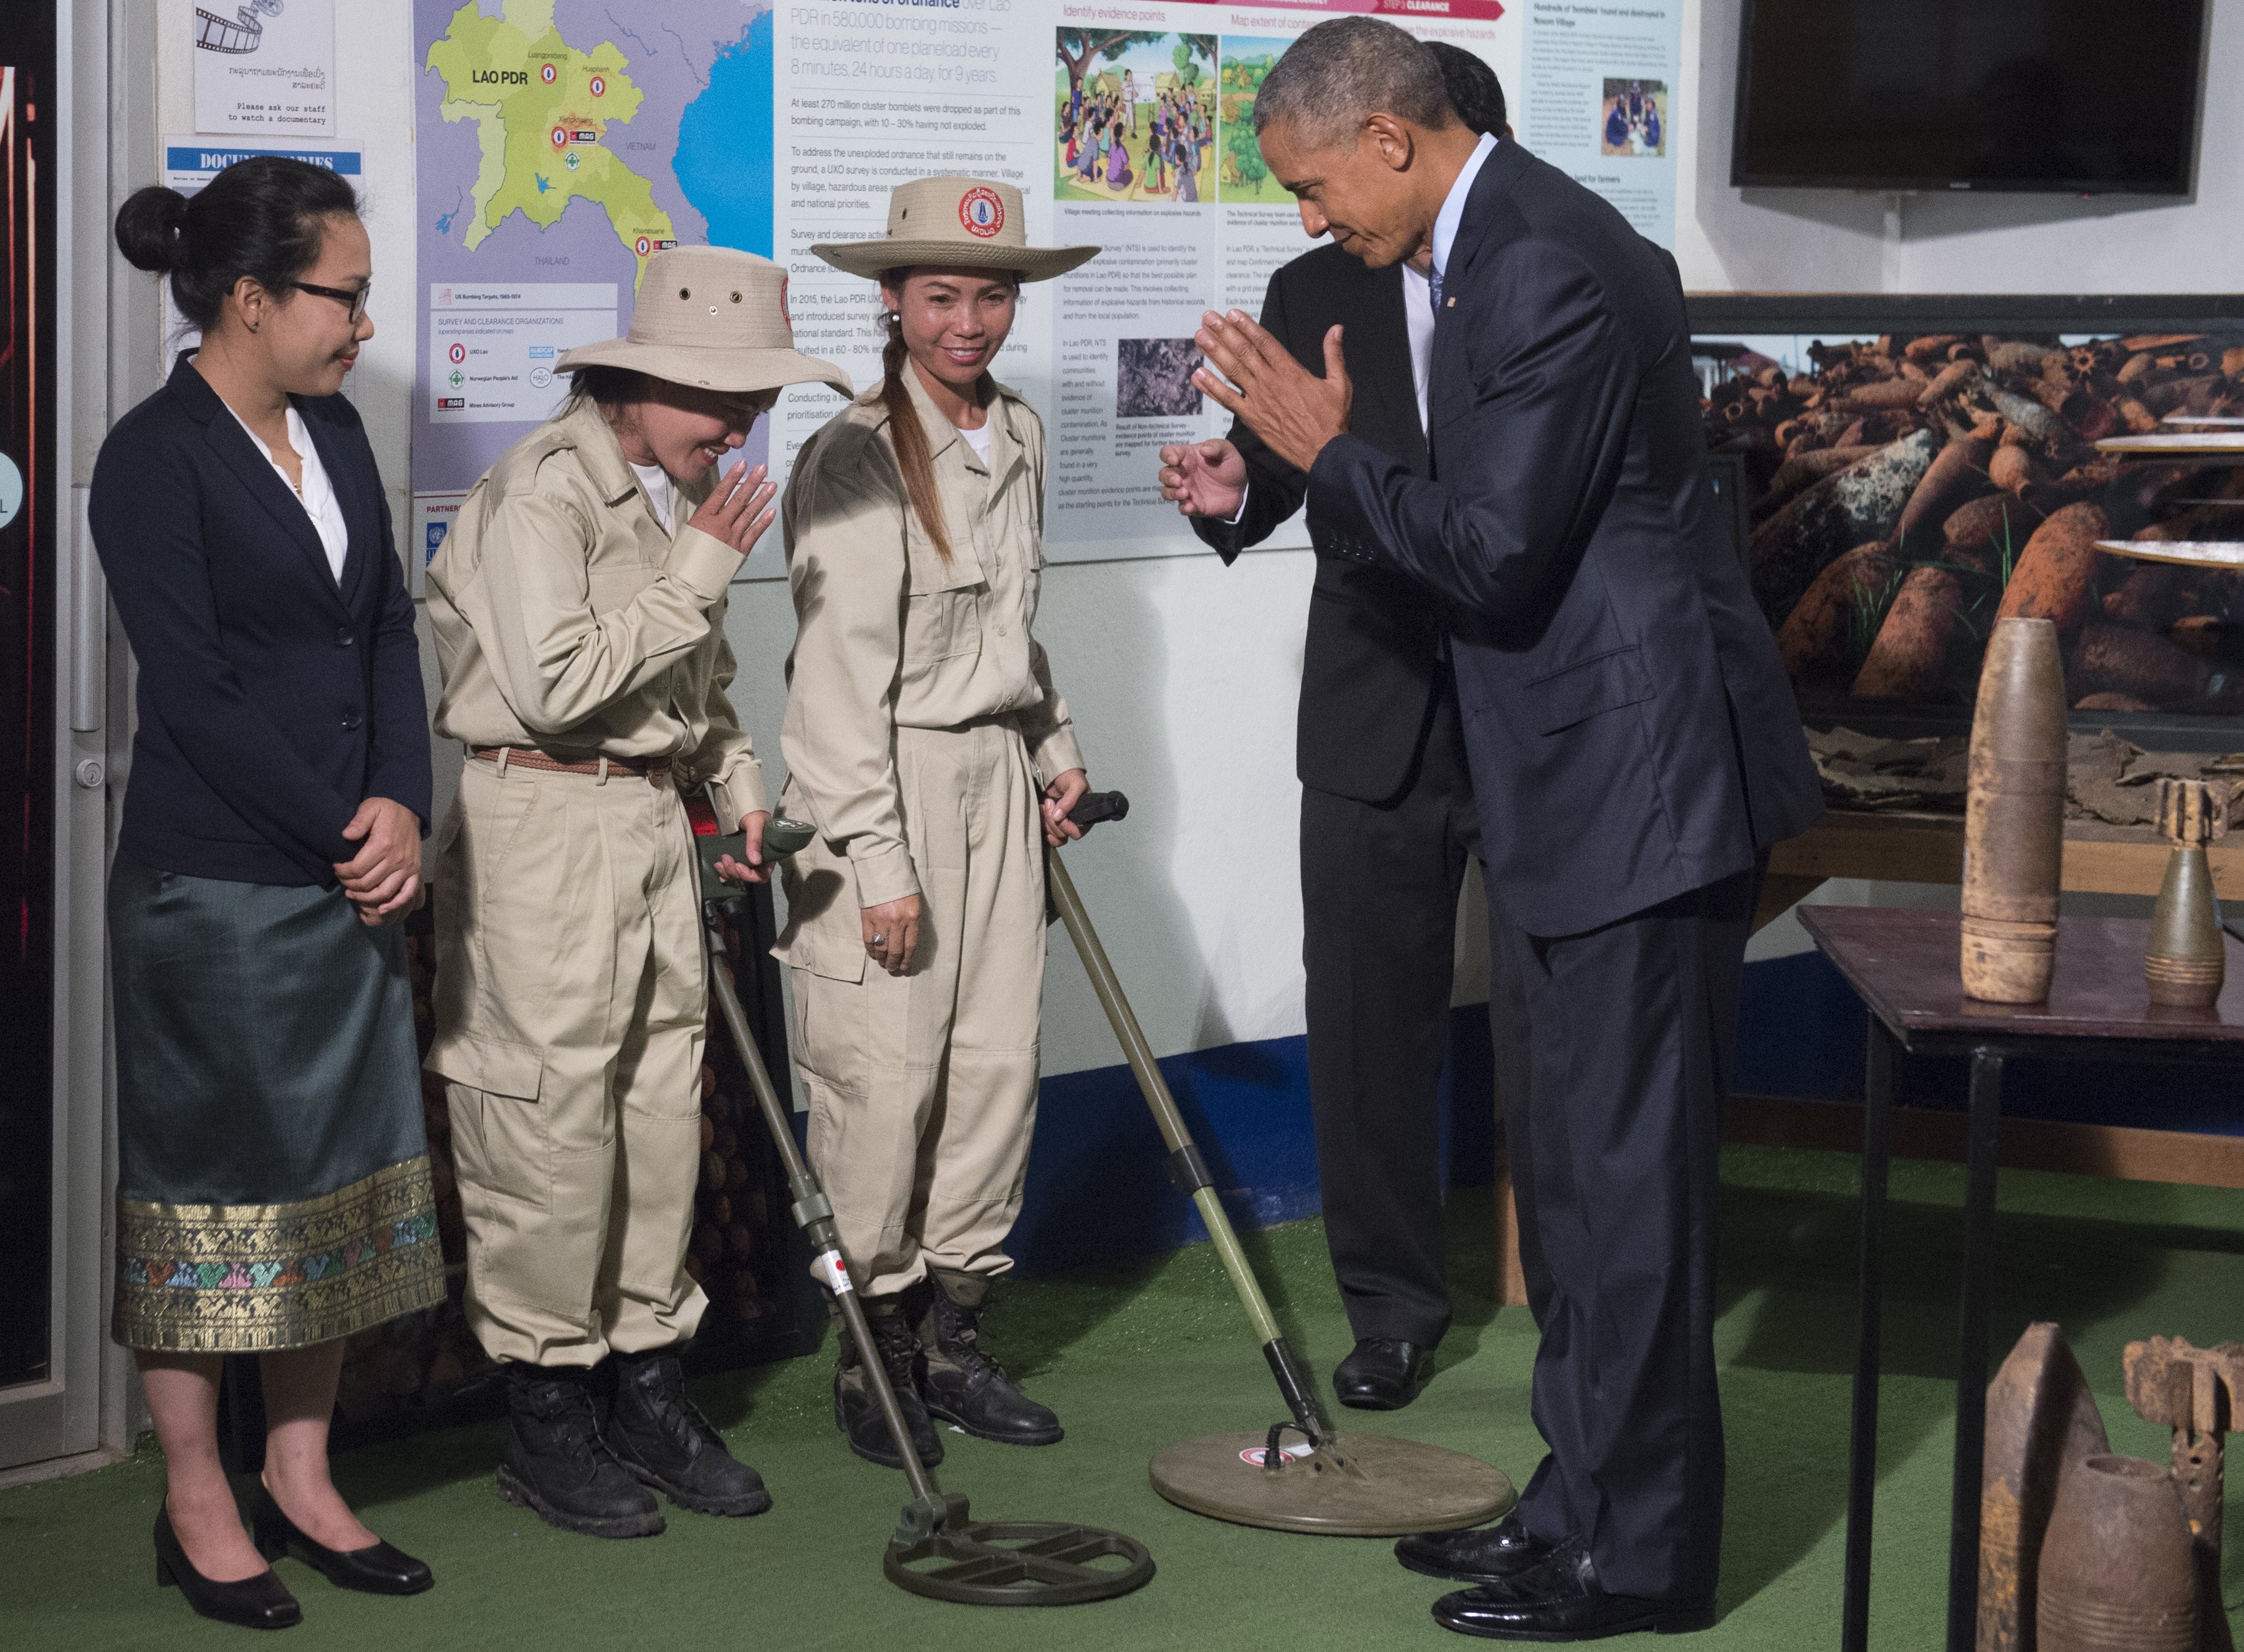 US President Barack Obama greets unexploded ordinance detectors as he tours the Cooperative Orthotic and Prosthetic Enterprise (COPE) visitor center in Vientiane on September 7, 2016. Obama became the first US president to visit Laos in office, touching down in Vientiane late on September 5 for a summit of East and South East Asian leaders. / AFP PHOTO / SAUL LOEB